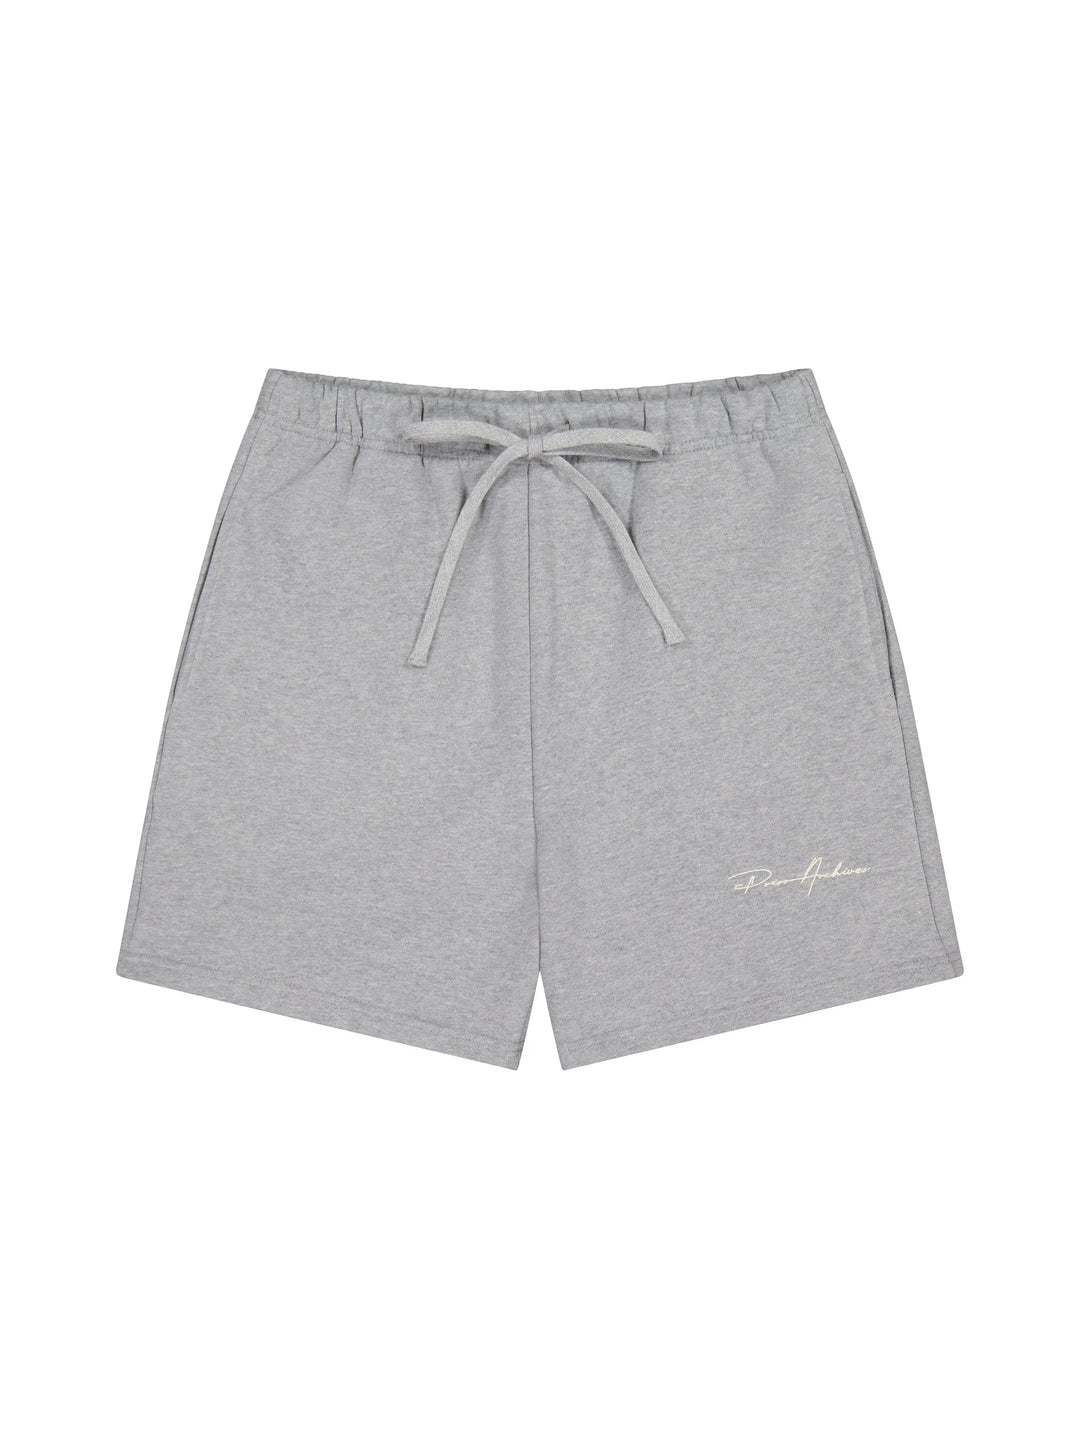 Prior Embroidery Logo Fitted Sweatshorts Heather Grey in Auckland, New Zealand - Shop name